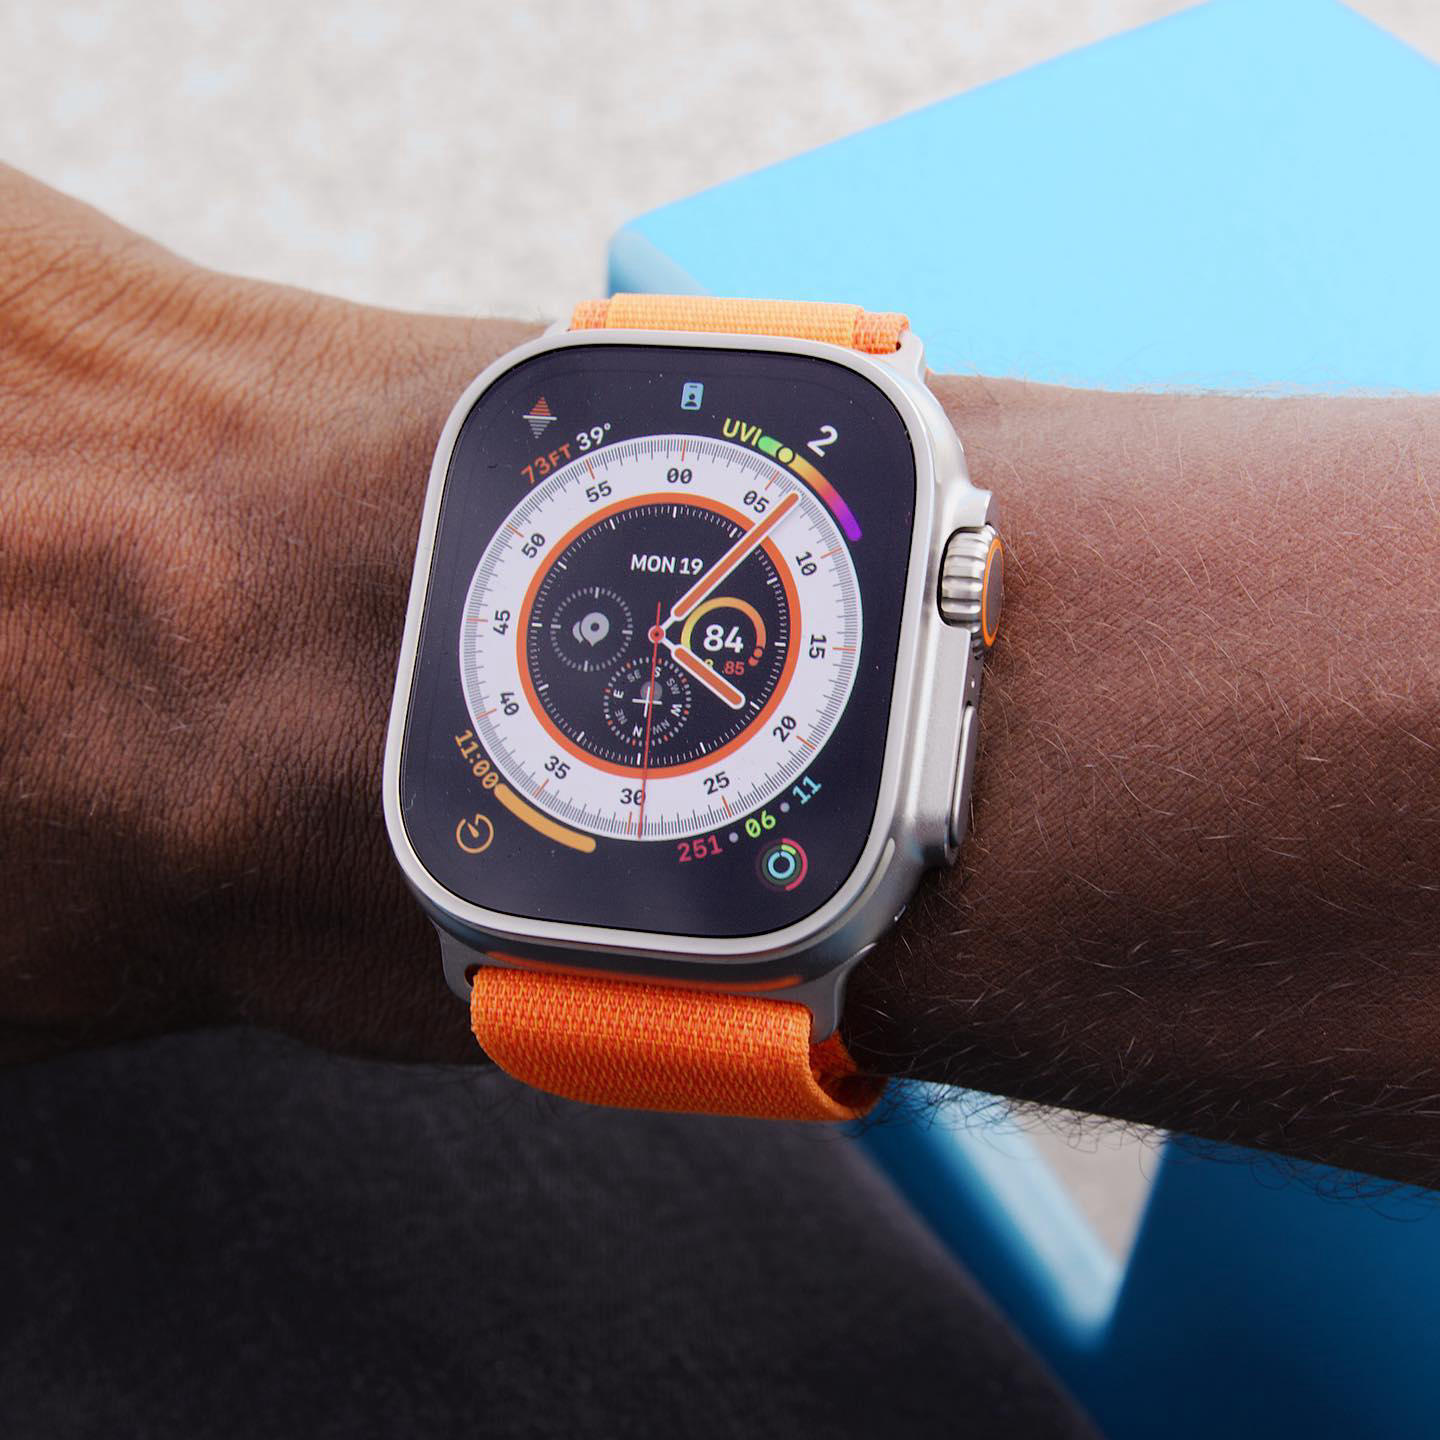 image  1 Marques Brownlee - My review of the Apple Watch Ultra is now live - it really reminds me of the ROG